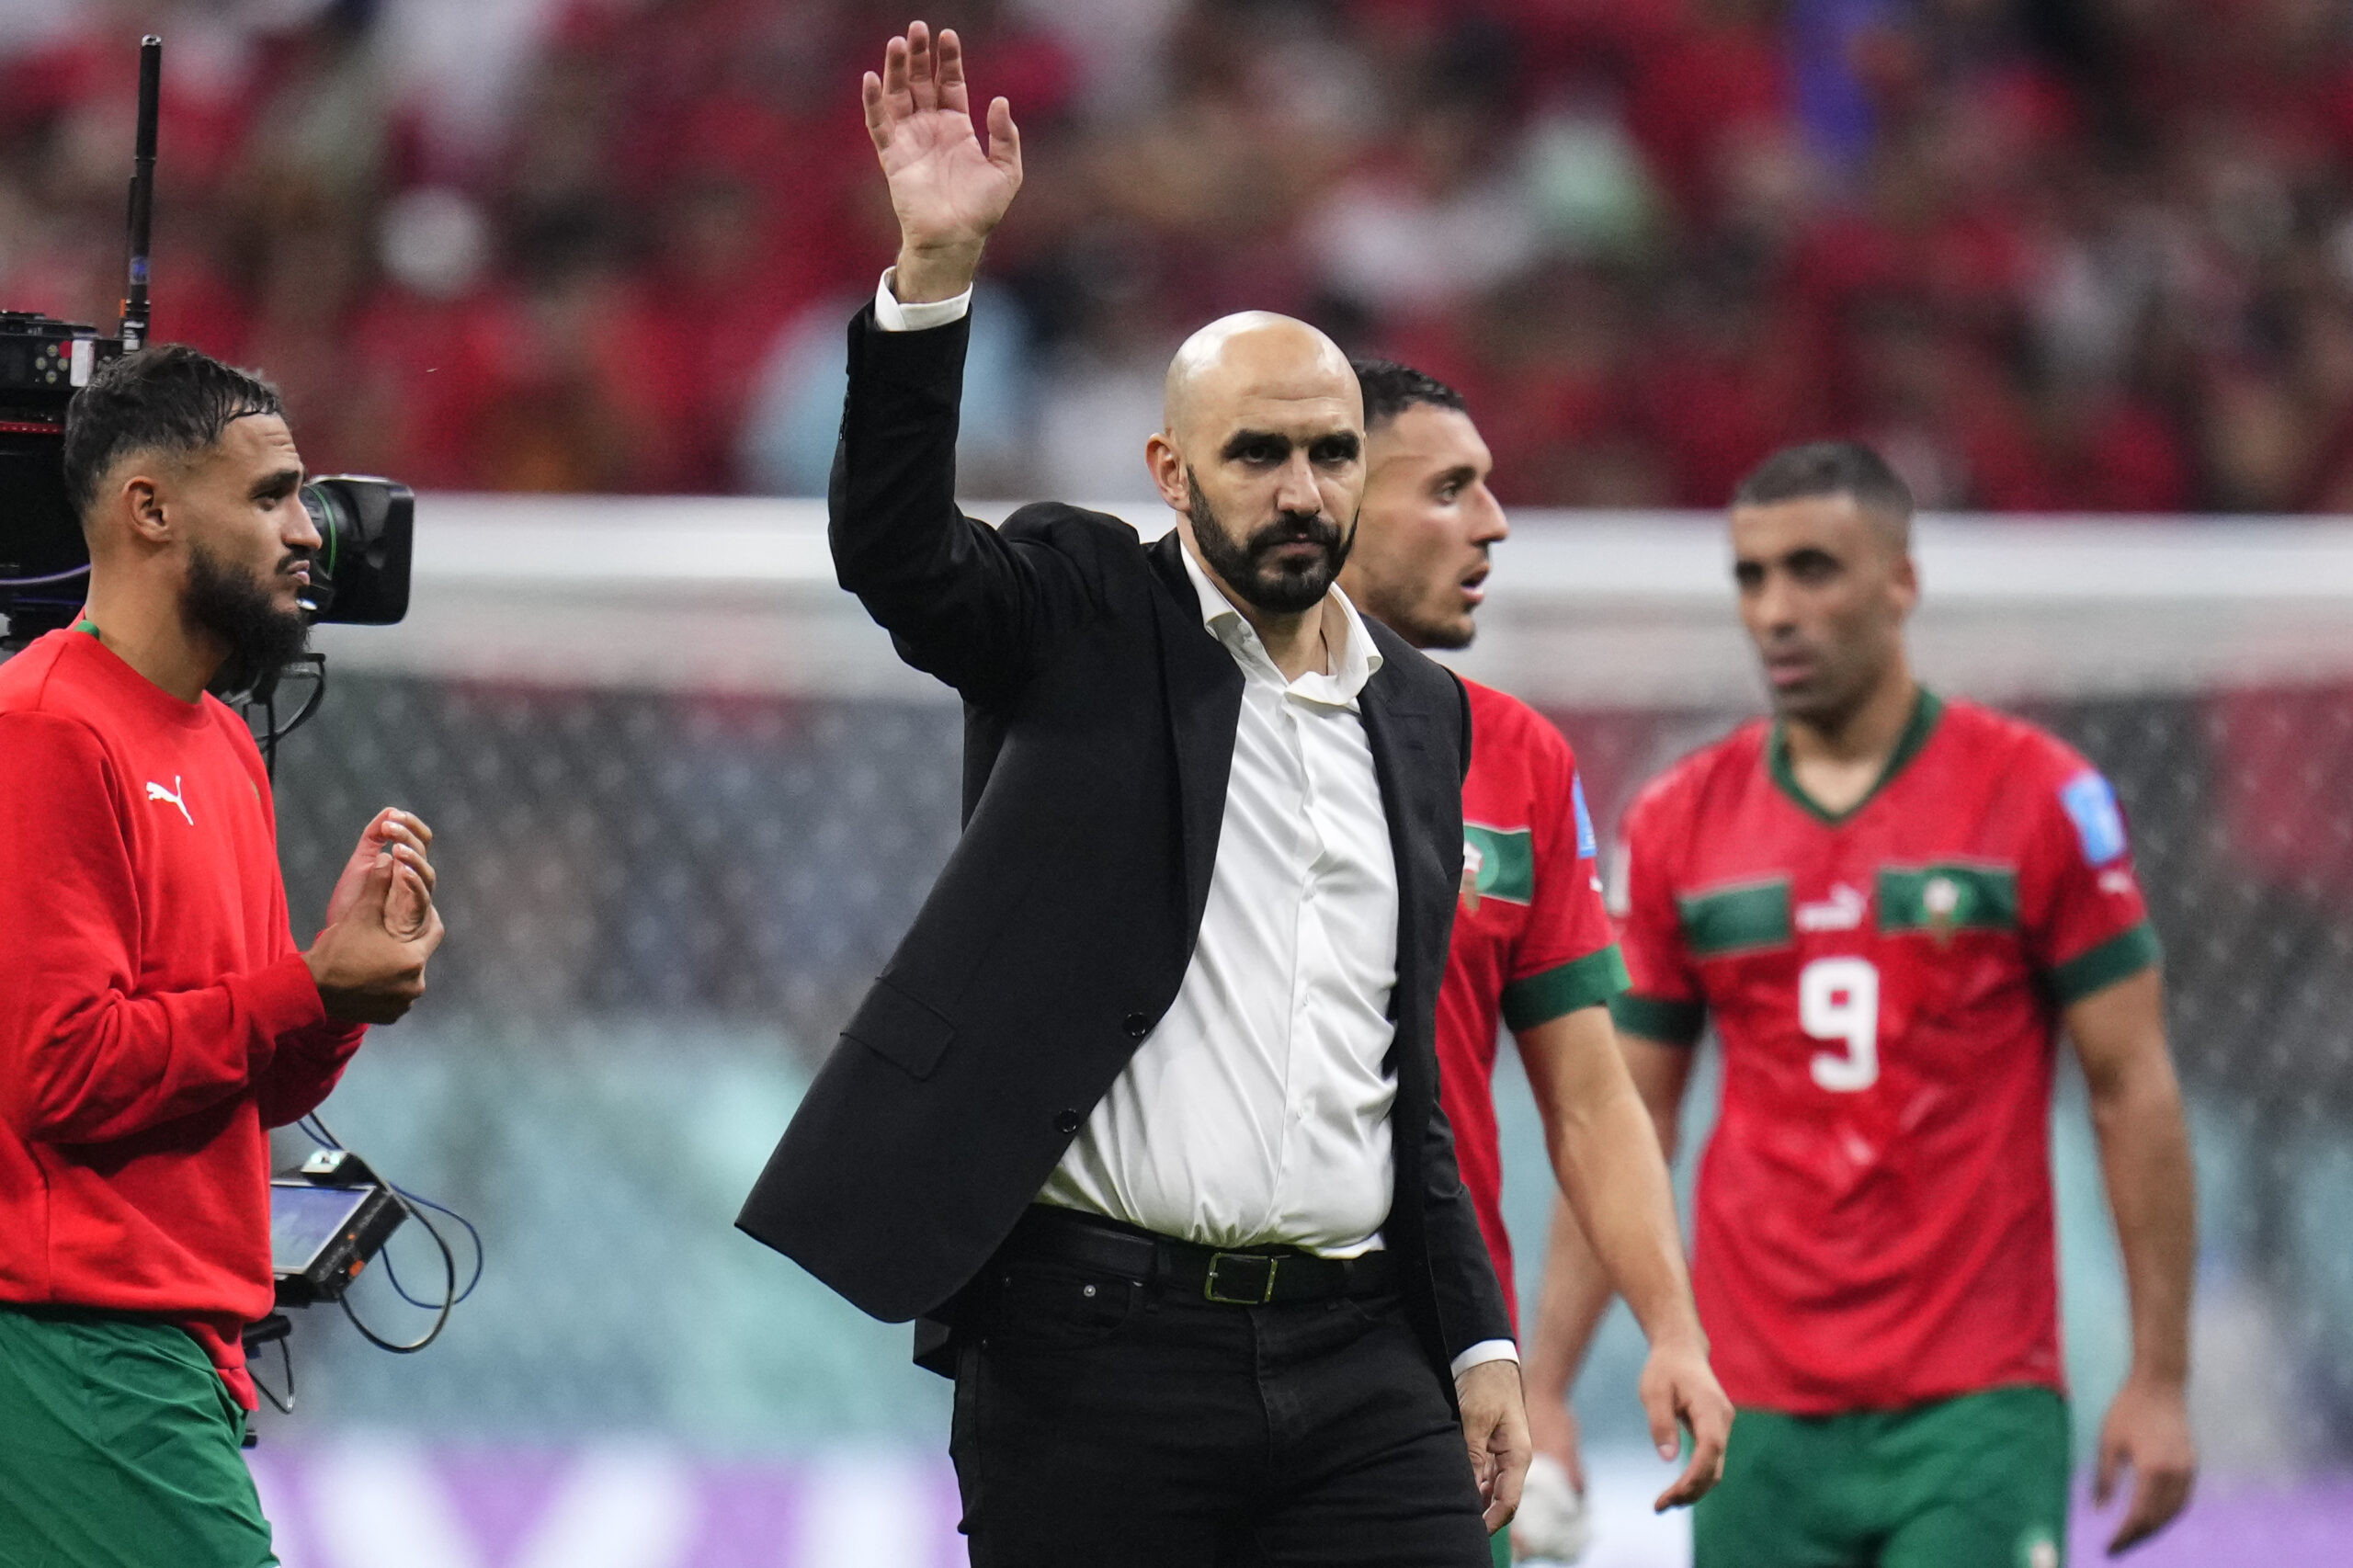 Morocco's head coach Walid Regragui waves to fans at the end of the World Cup semifinal soccer match between France and Morocco at the Al Bayt Stadium in Al Khor, Qatar, Wednesday, Dec. 14, 2022. France won 2-0 and will play Argentina in Sunday's final. (AP Photo/Manu Fernandez)